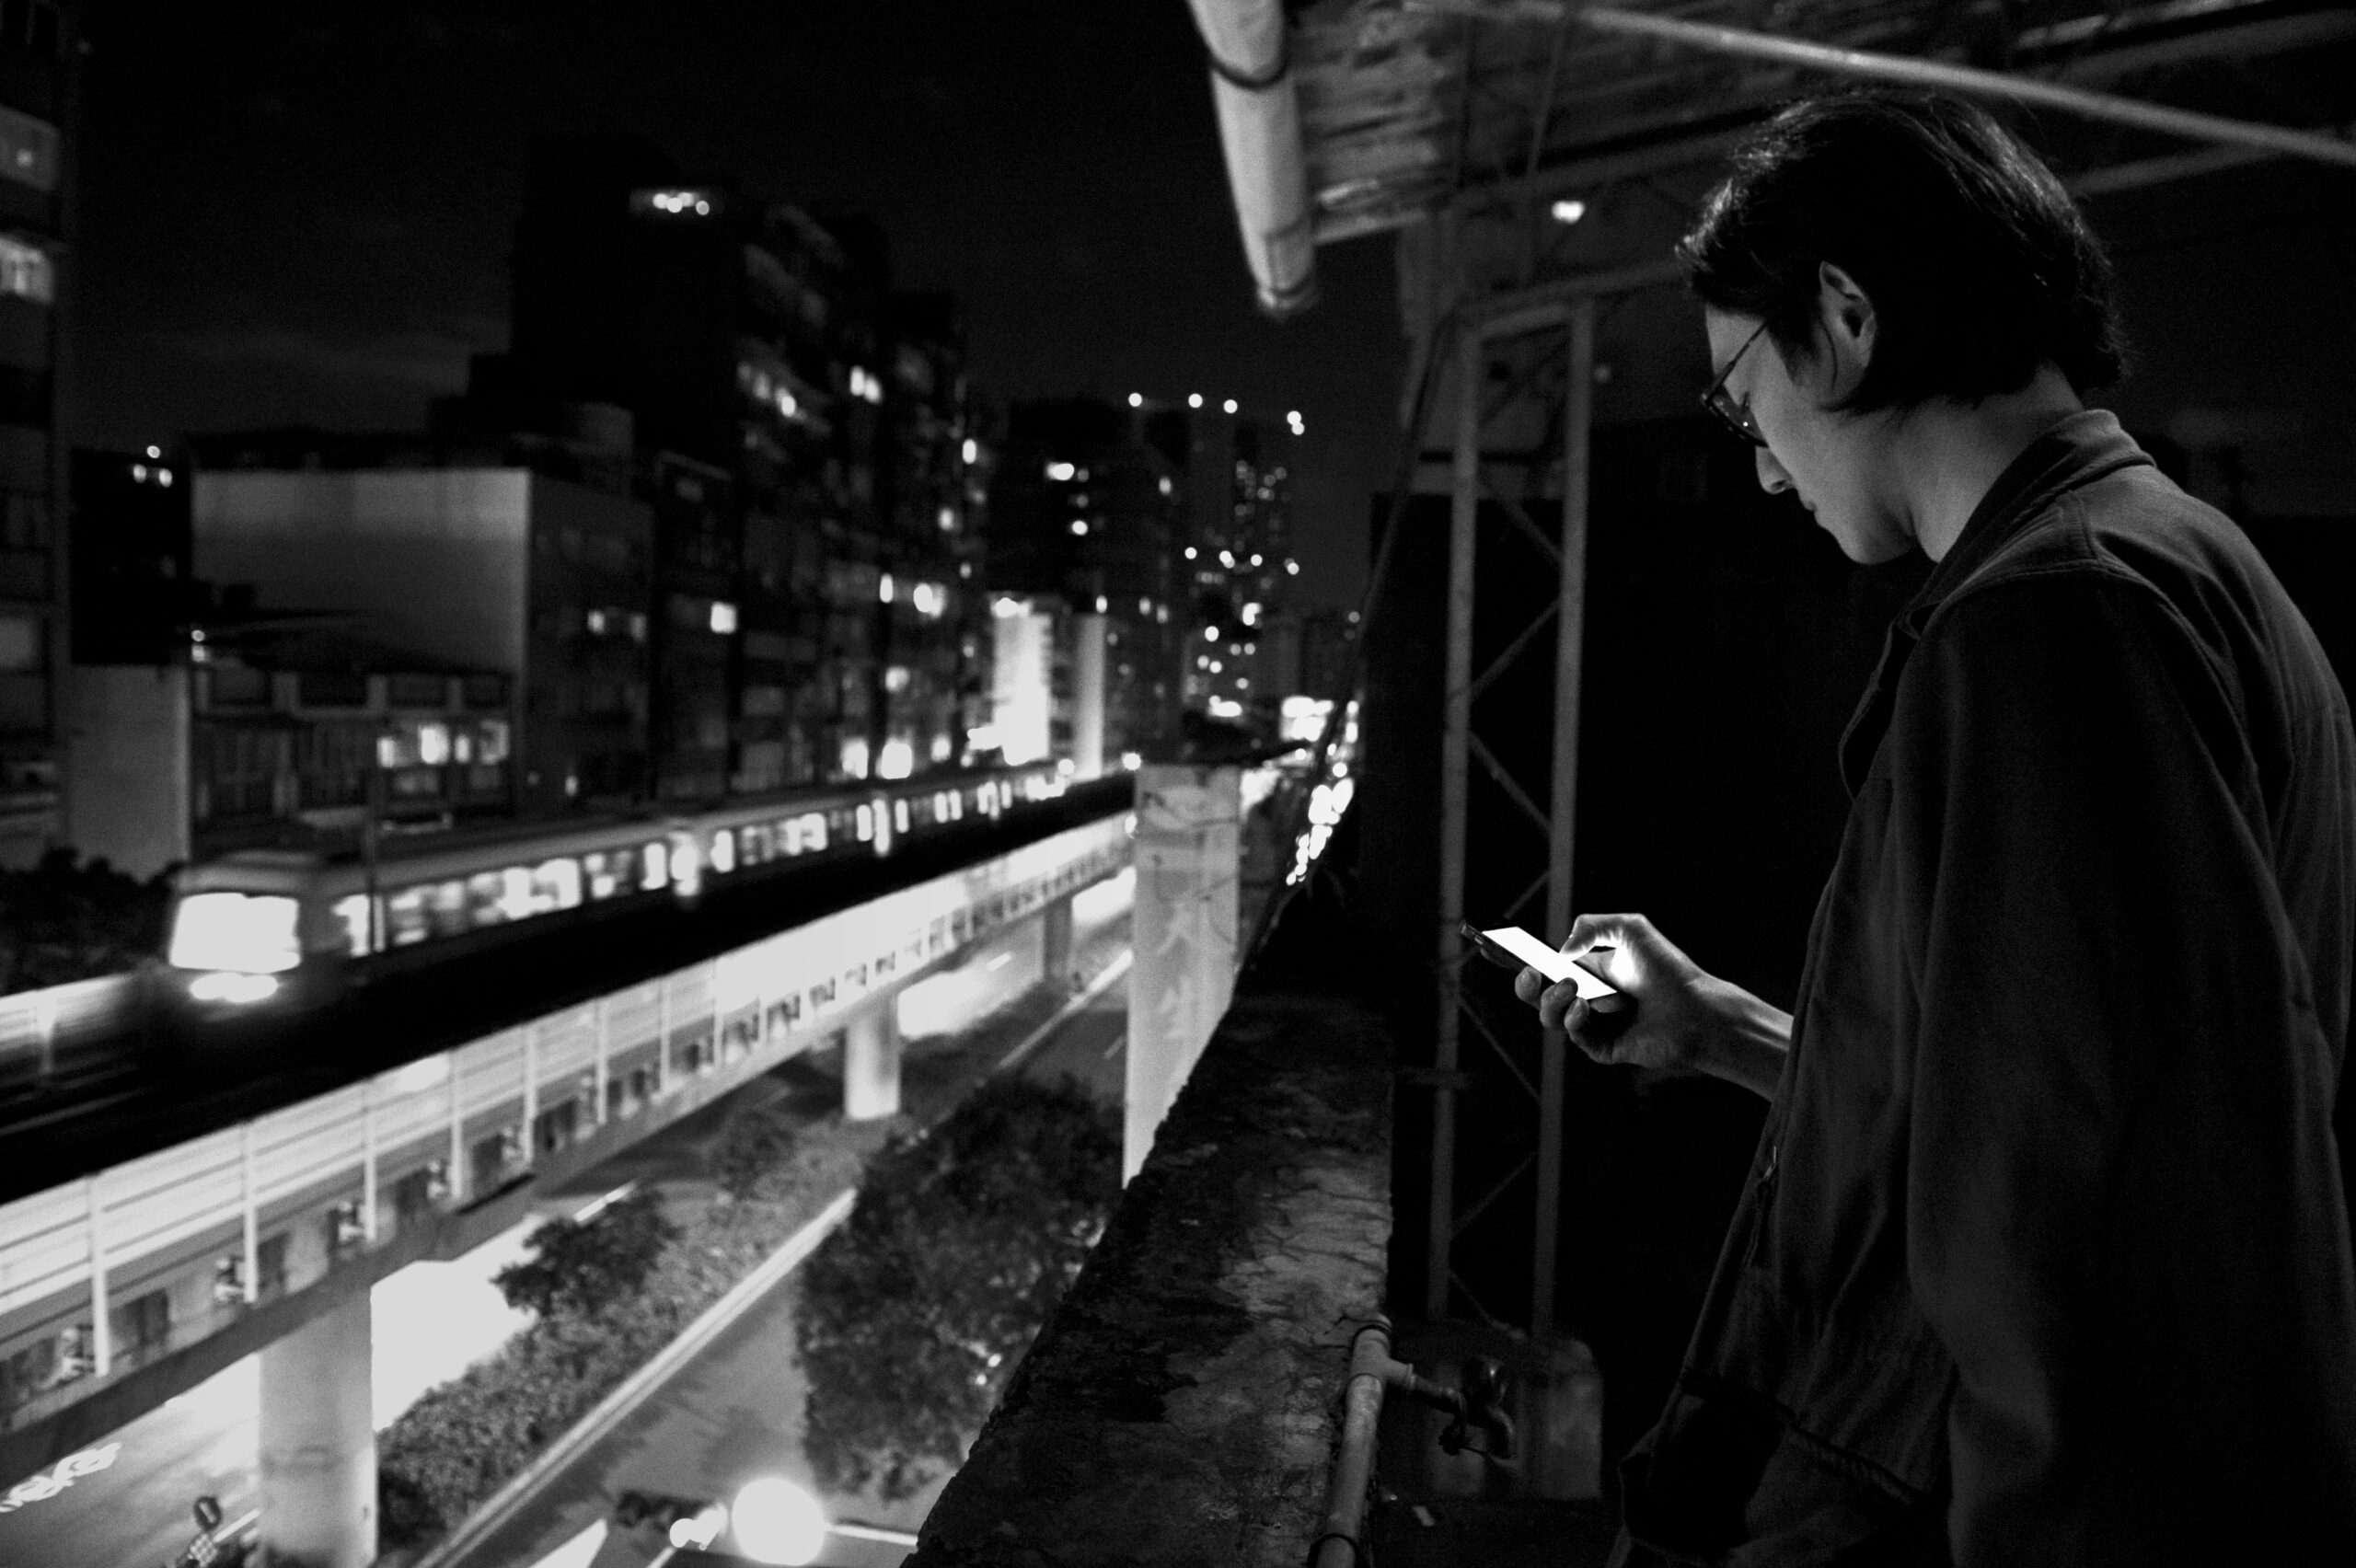 A black and white still from the film 'Far Away Eyes' by the director Wang Chung-Hong. In this image, we see a Taiwanese man in his late 20's standing on a balcony of a building located in an industrial area in Taiwan at night-time. He is wearing glasses and a dark jacket, and he is standing to the right of the frame, slightly turned away from the camera. In his right hand, he holds his mobile phone, which he is focusing on. The man is facing railway tracks, and we can see a train passing by in the background. Behind him, there are several apartment blocks and some shrubbery.